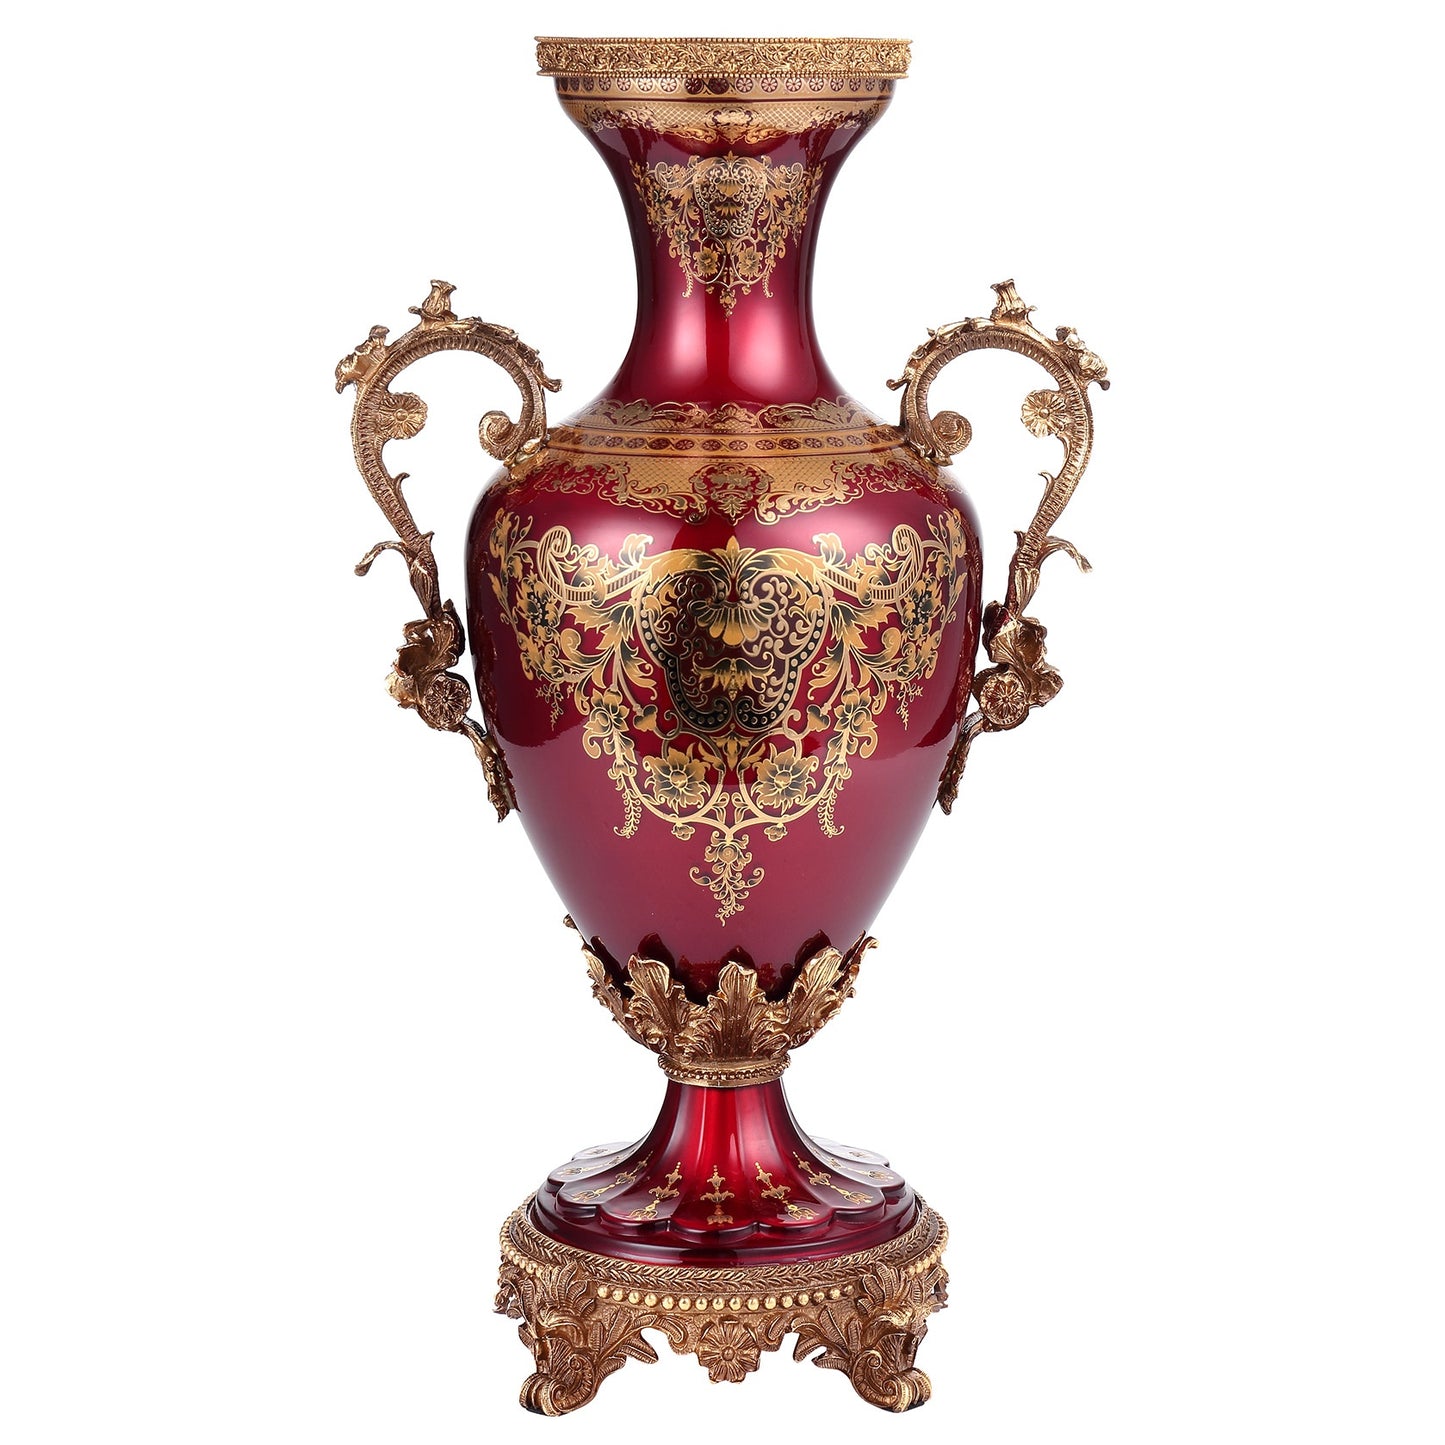 Vase in Bronze & Ruby Red & Gold Finish AC6028 European Traditional Victorian